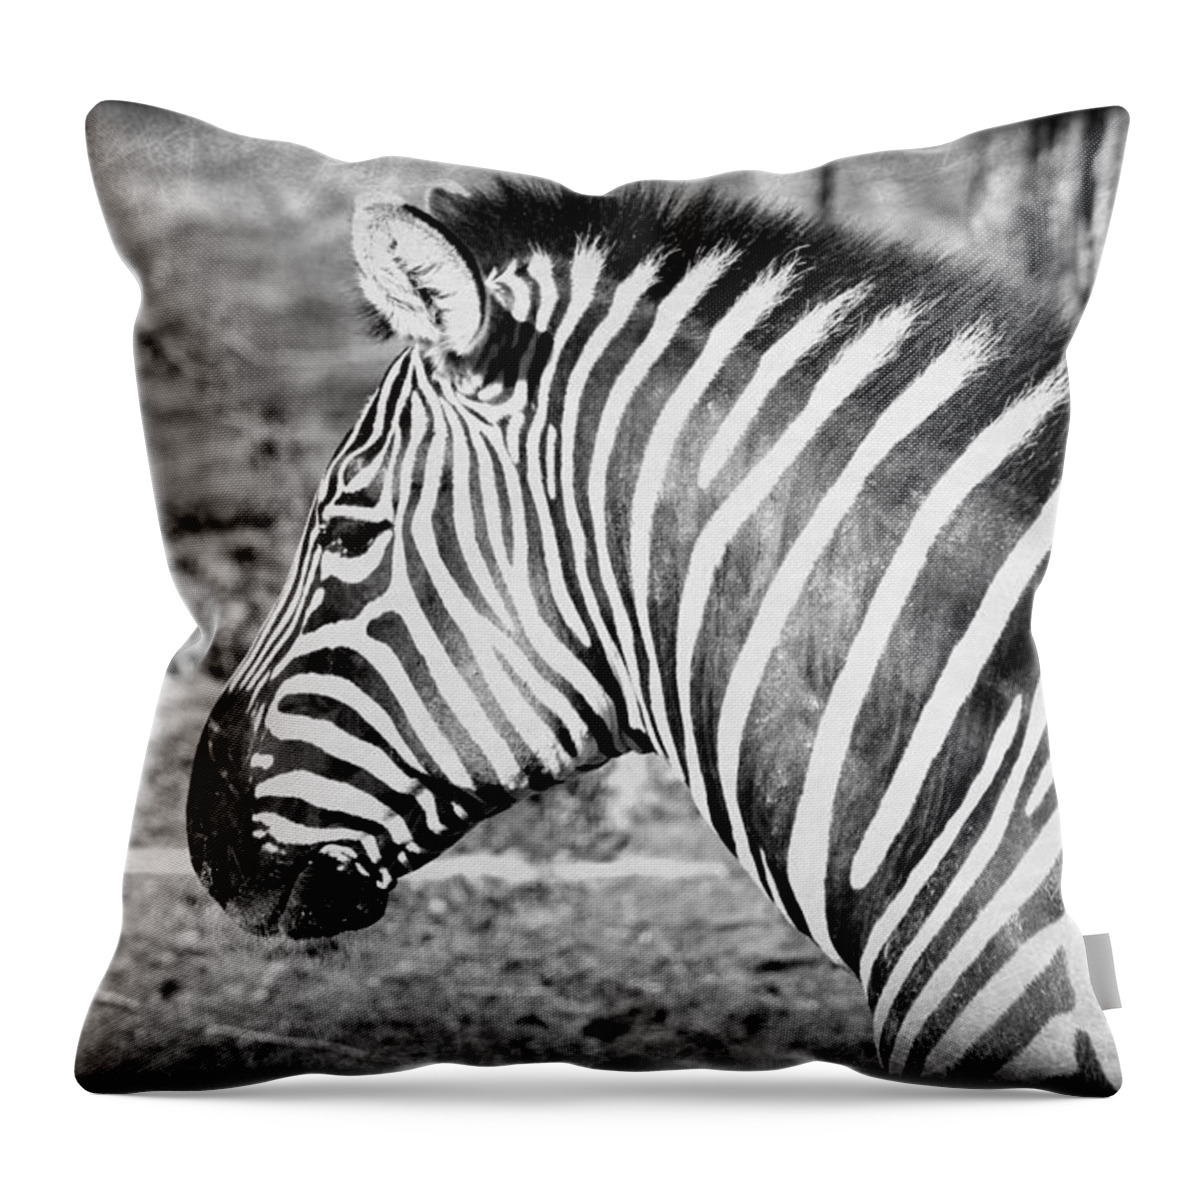 Zebra Throw Pillow featuring the photograph Black and White All Over by Elizabeth Budd